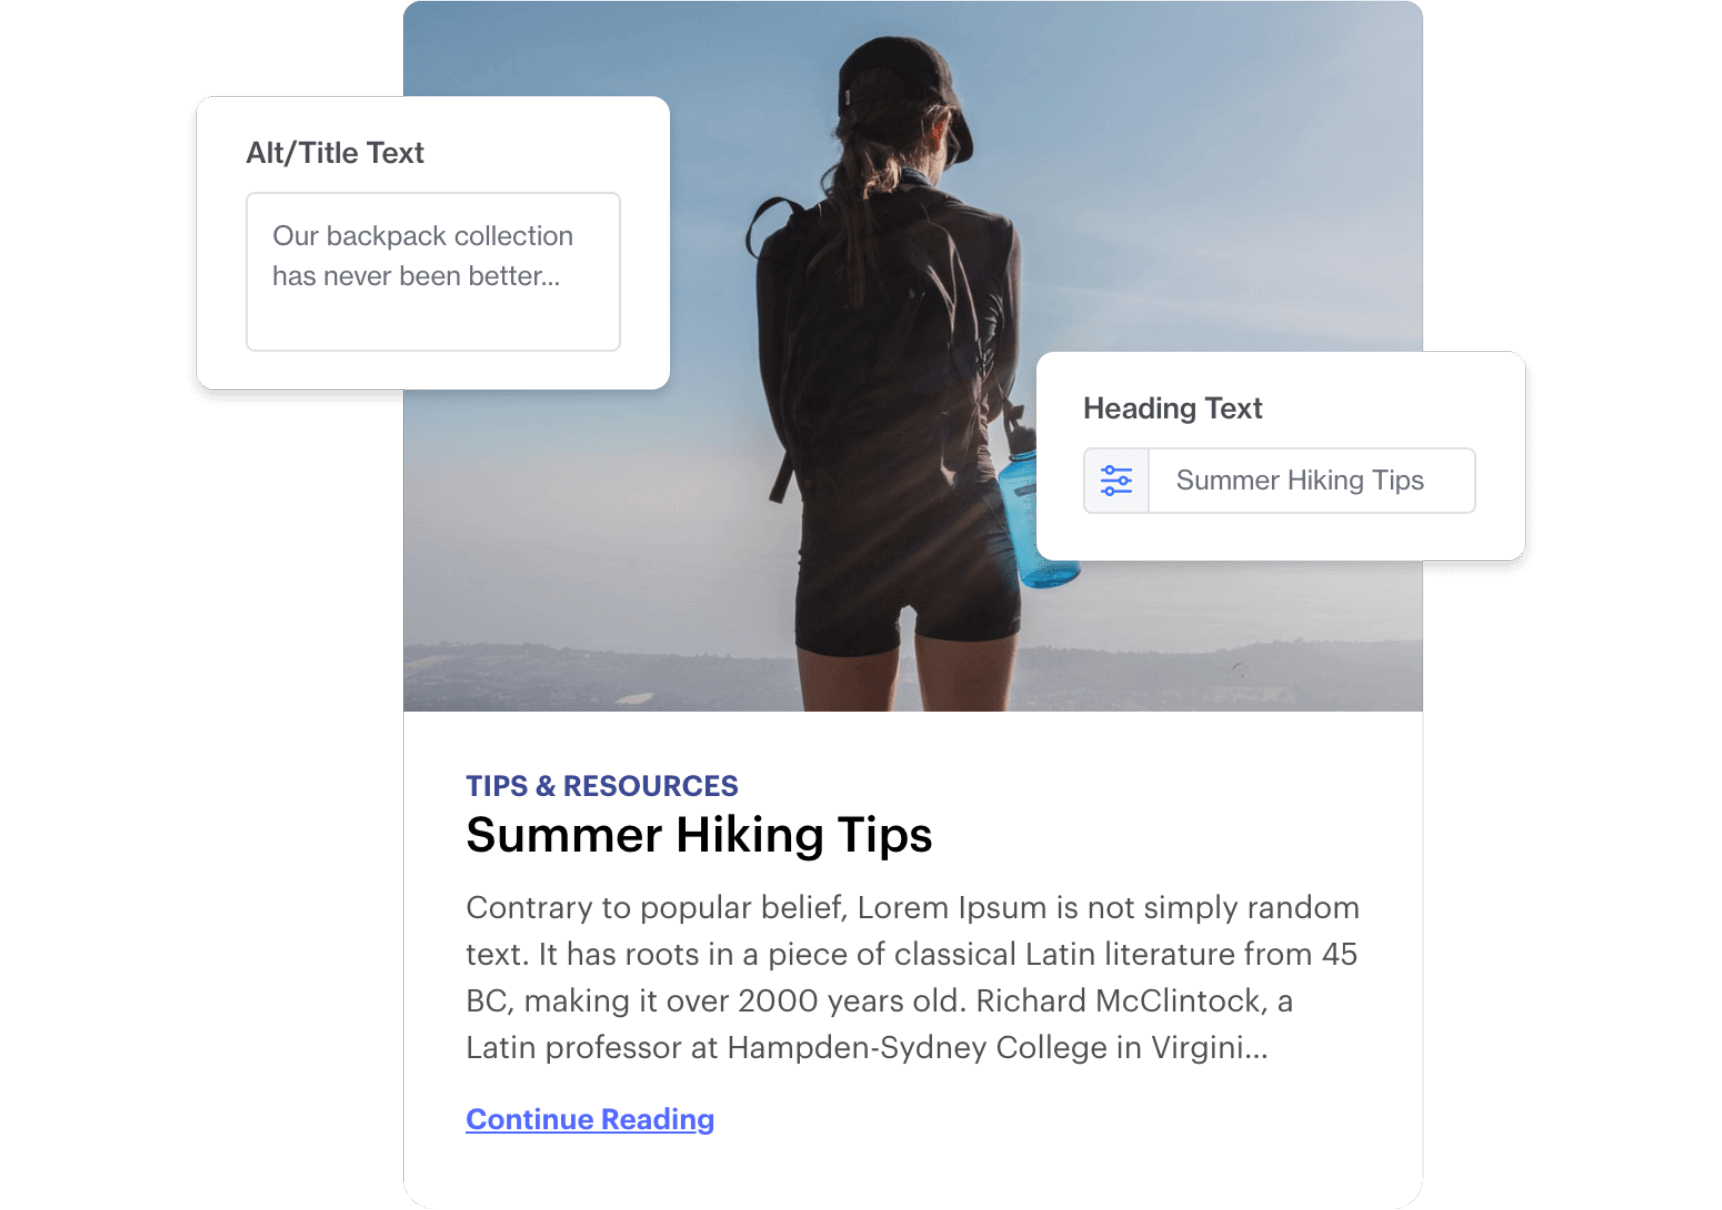 Tip card for Summer Hiking Tips with some popouts showing headting text and alt text editing.